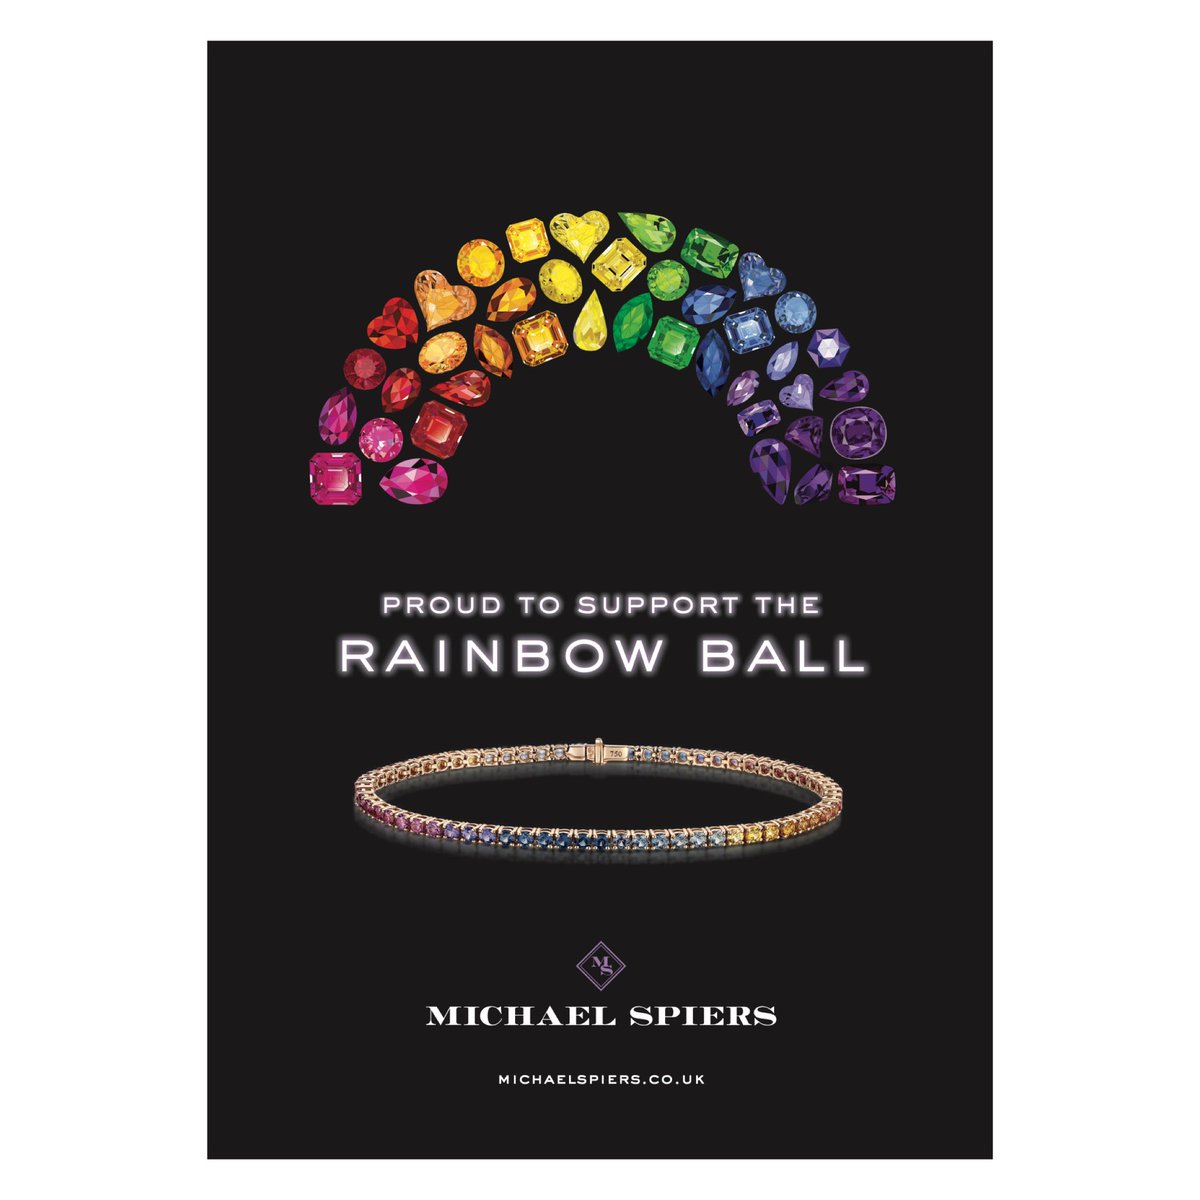 Thank you @MichaelSpiers for your continued support of The Rainbow Ball. 🌈